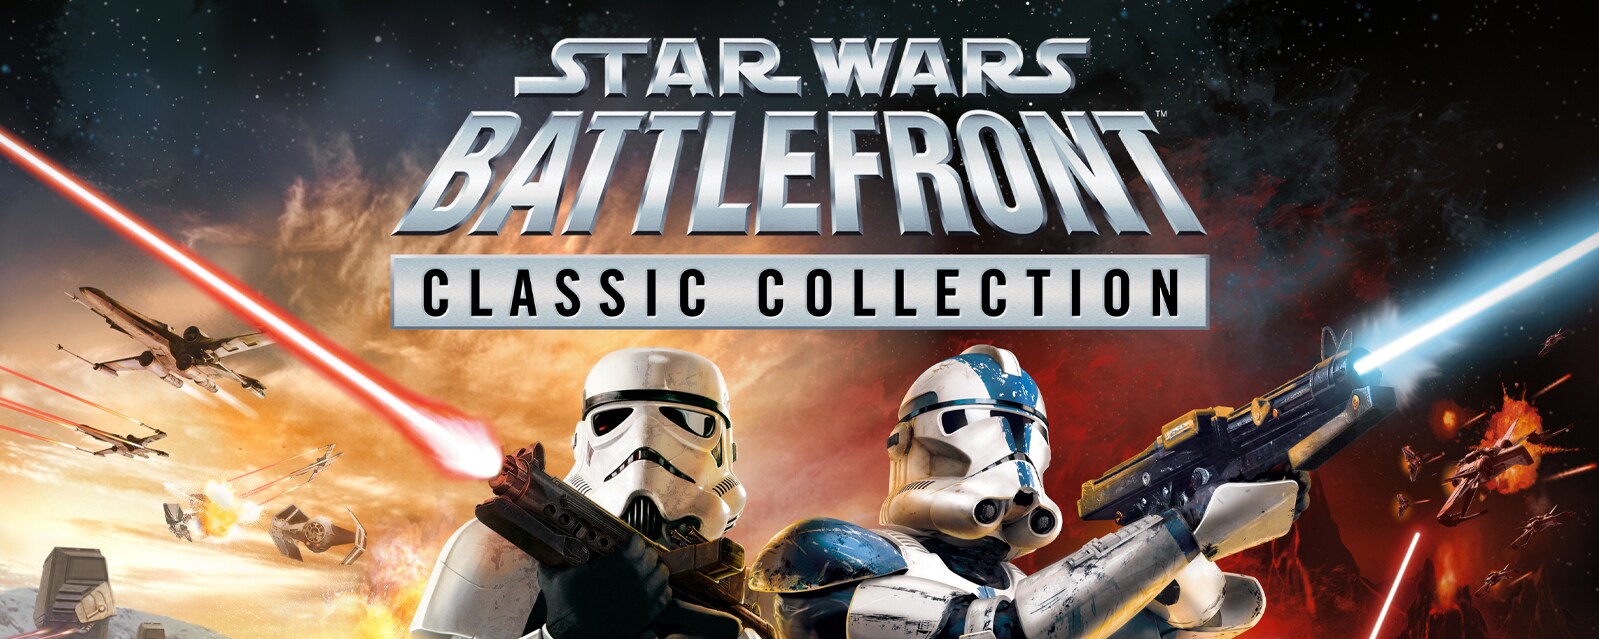 Star Wars: Battlefront Classic Collection key art featuring a stormtrooper and clone trooper